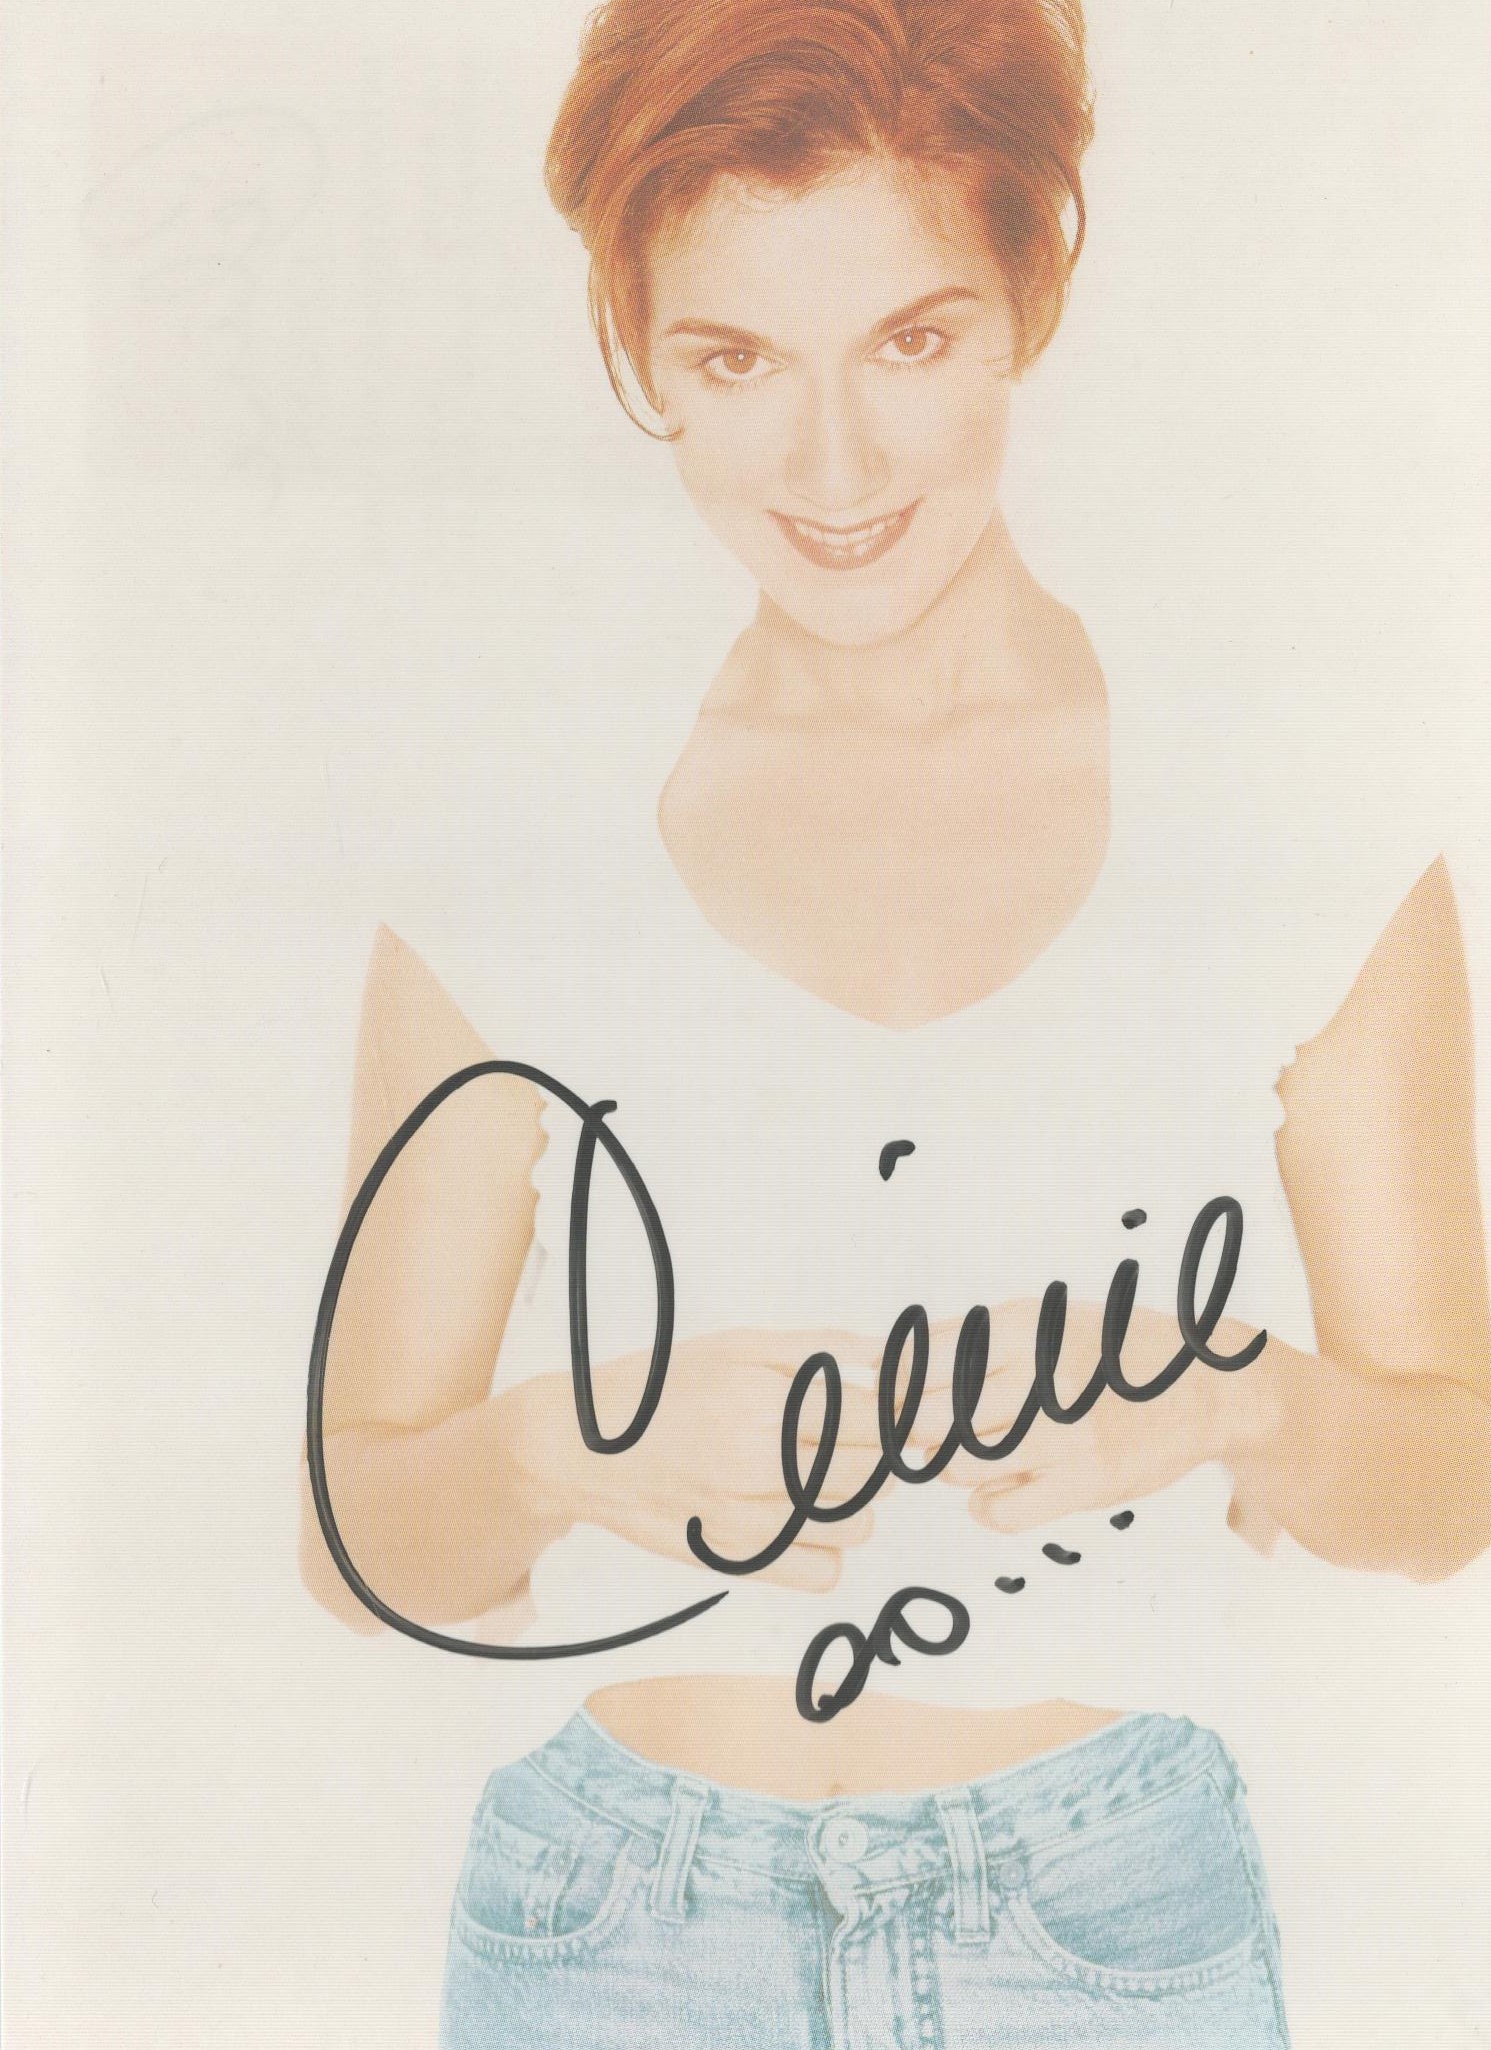 Celine Dion signed 7x5 inch approx. colour promo photo. Good Condition. All autographs come with a